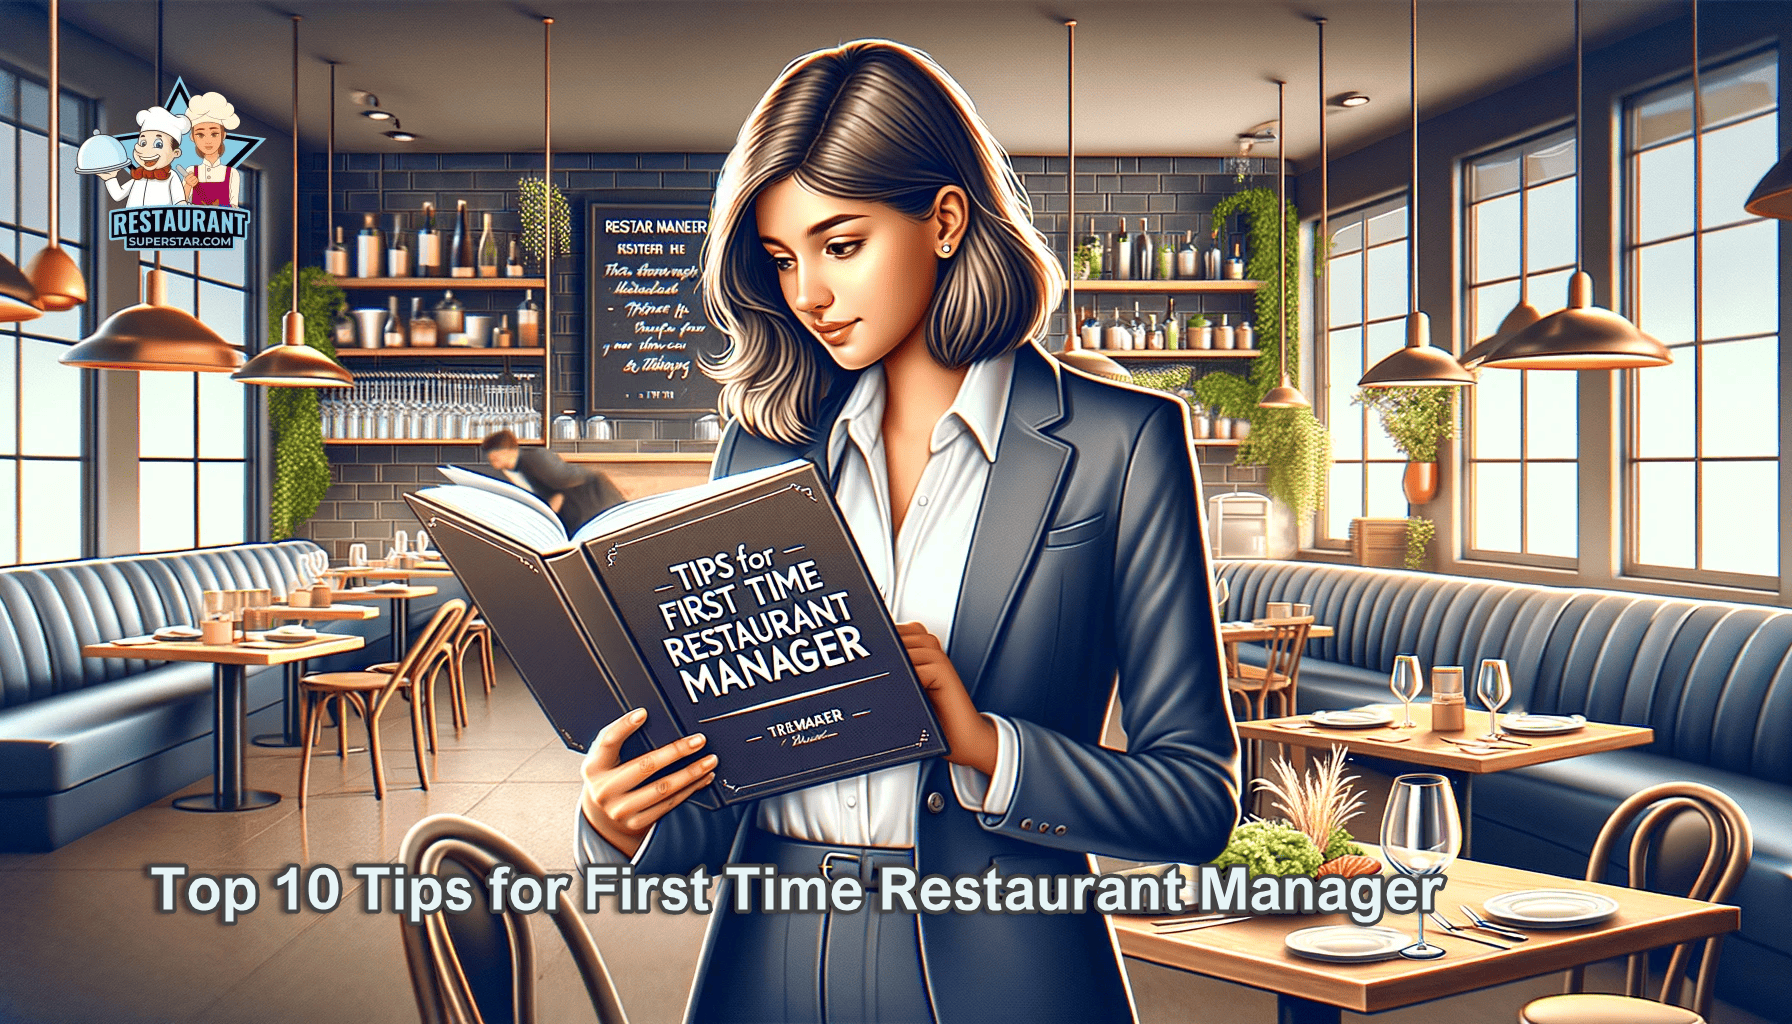 Top 10 Tips for First Time Restaurant Managers